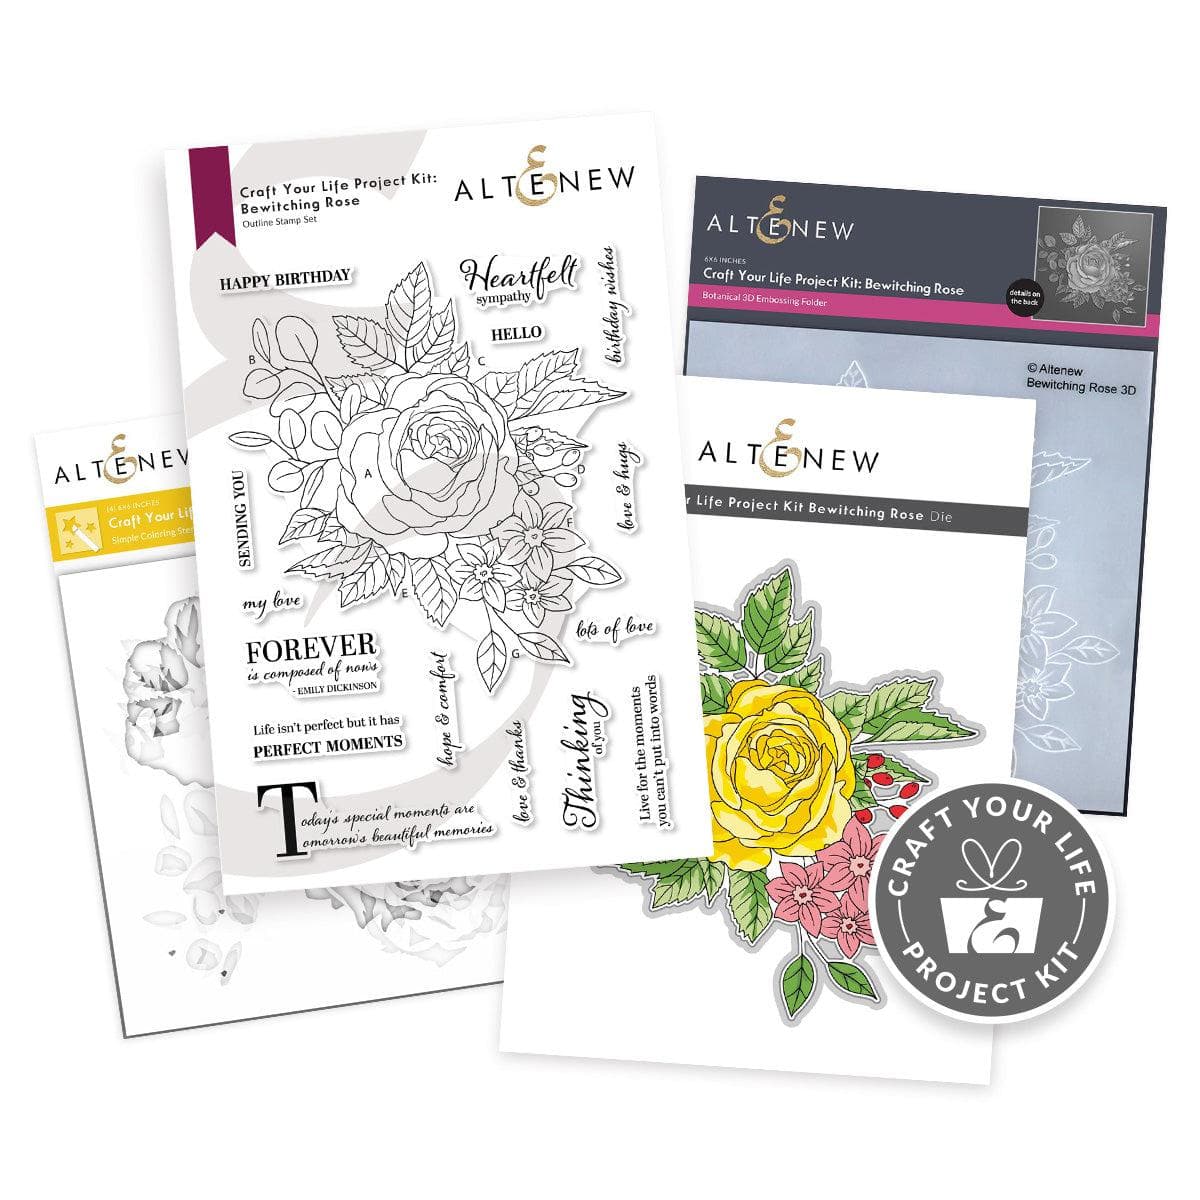 Altenew Craft Your Life Project Kit: Bewitching Rose